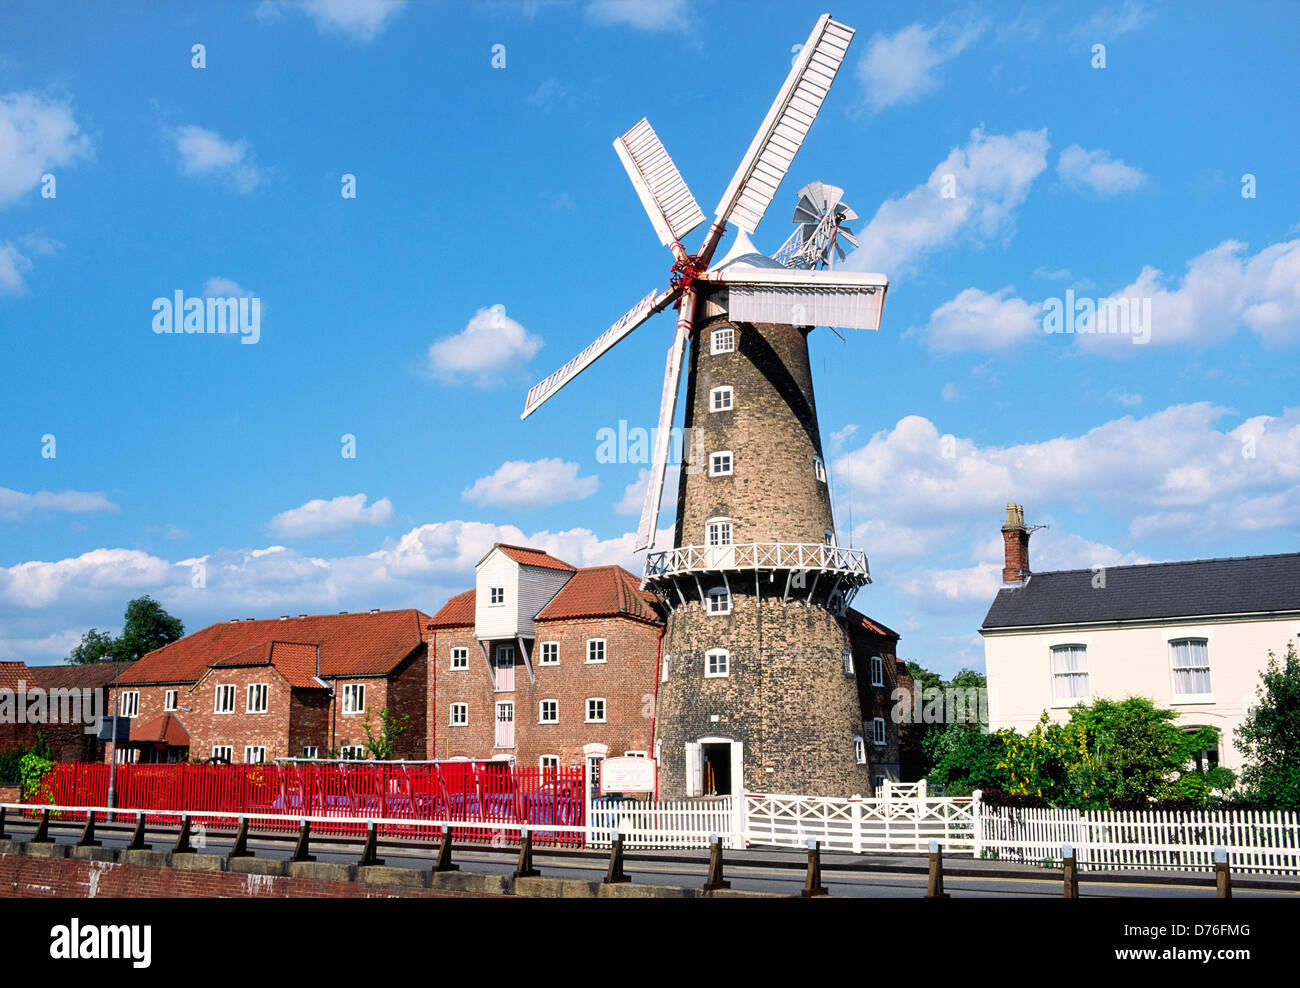 Maud Foster Windmill built in 1819 in the town of Boston, Lincolnshire, England UK Stock Photo